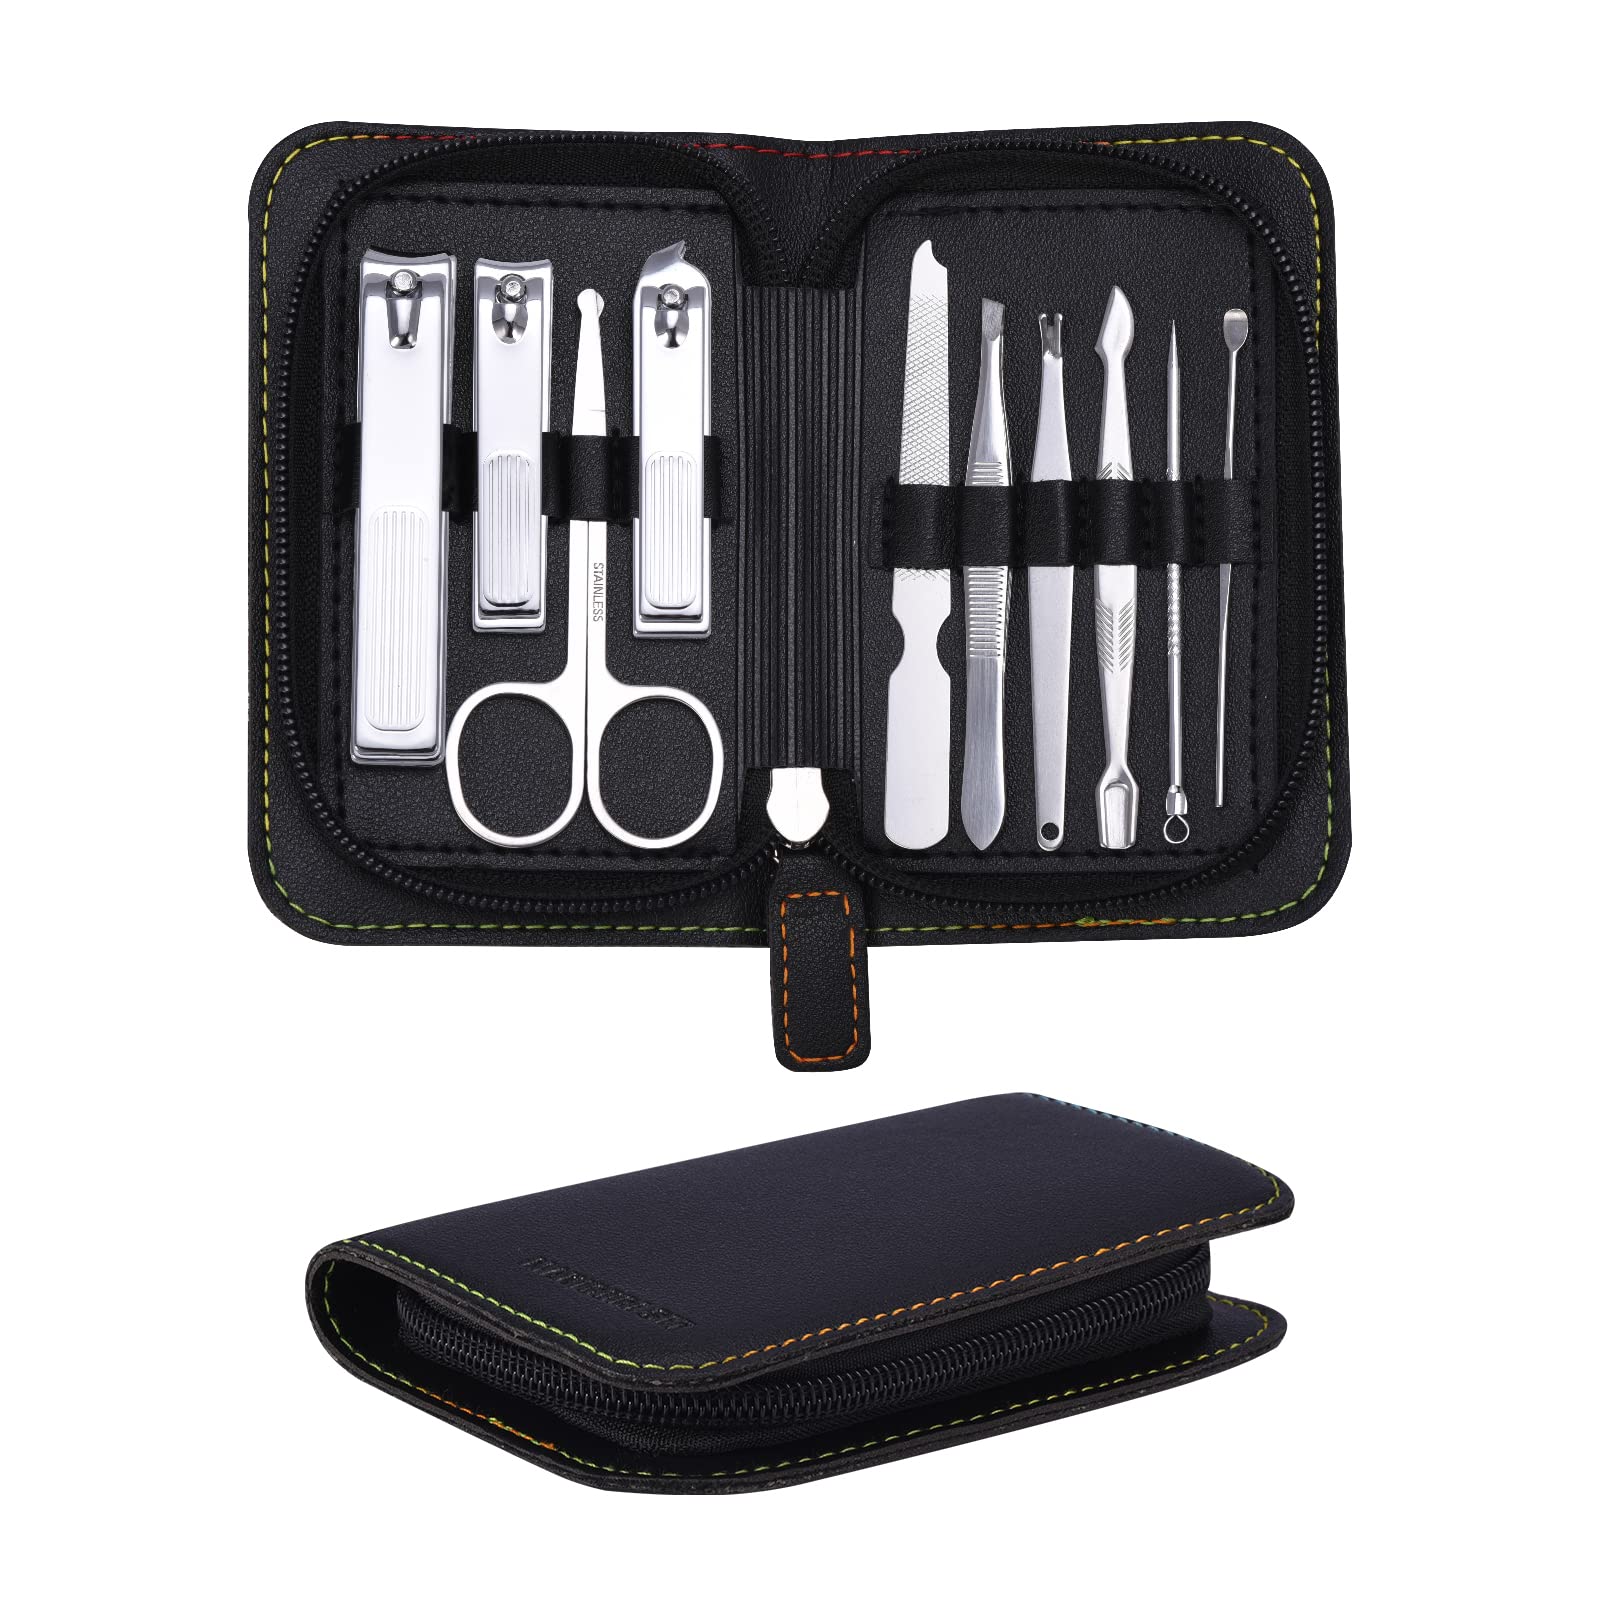 FIXBODY Nail Clippers Set, Professional Manicure set and Pedicure Kit, 10  Pieces Stainless Steel Nail Care Kit, Nail Clippers and Toenail Clippers  with Black Leather Case, Gift for Men and Women